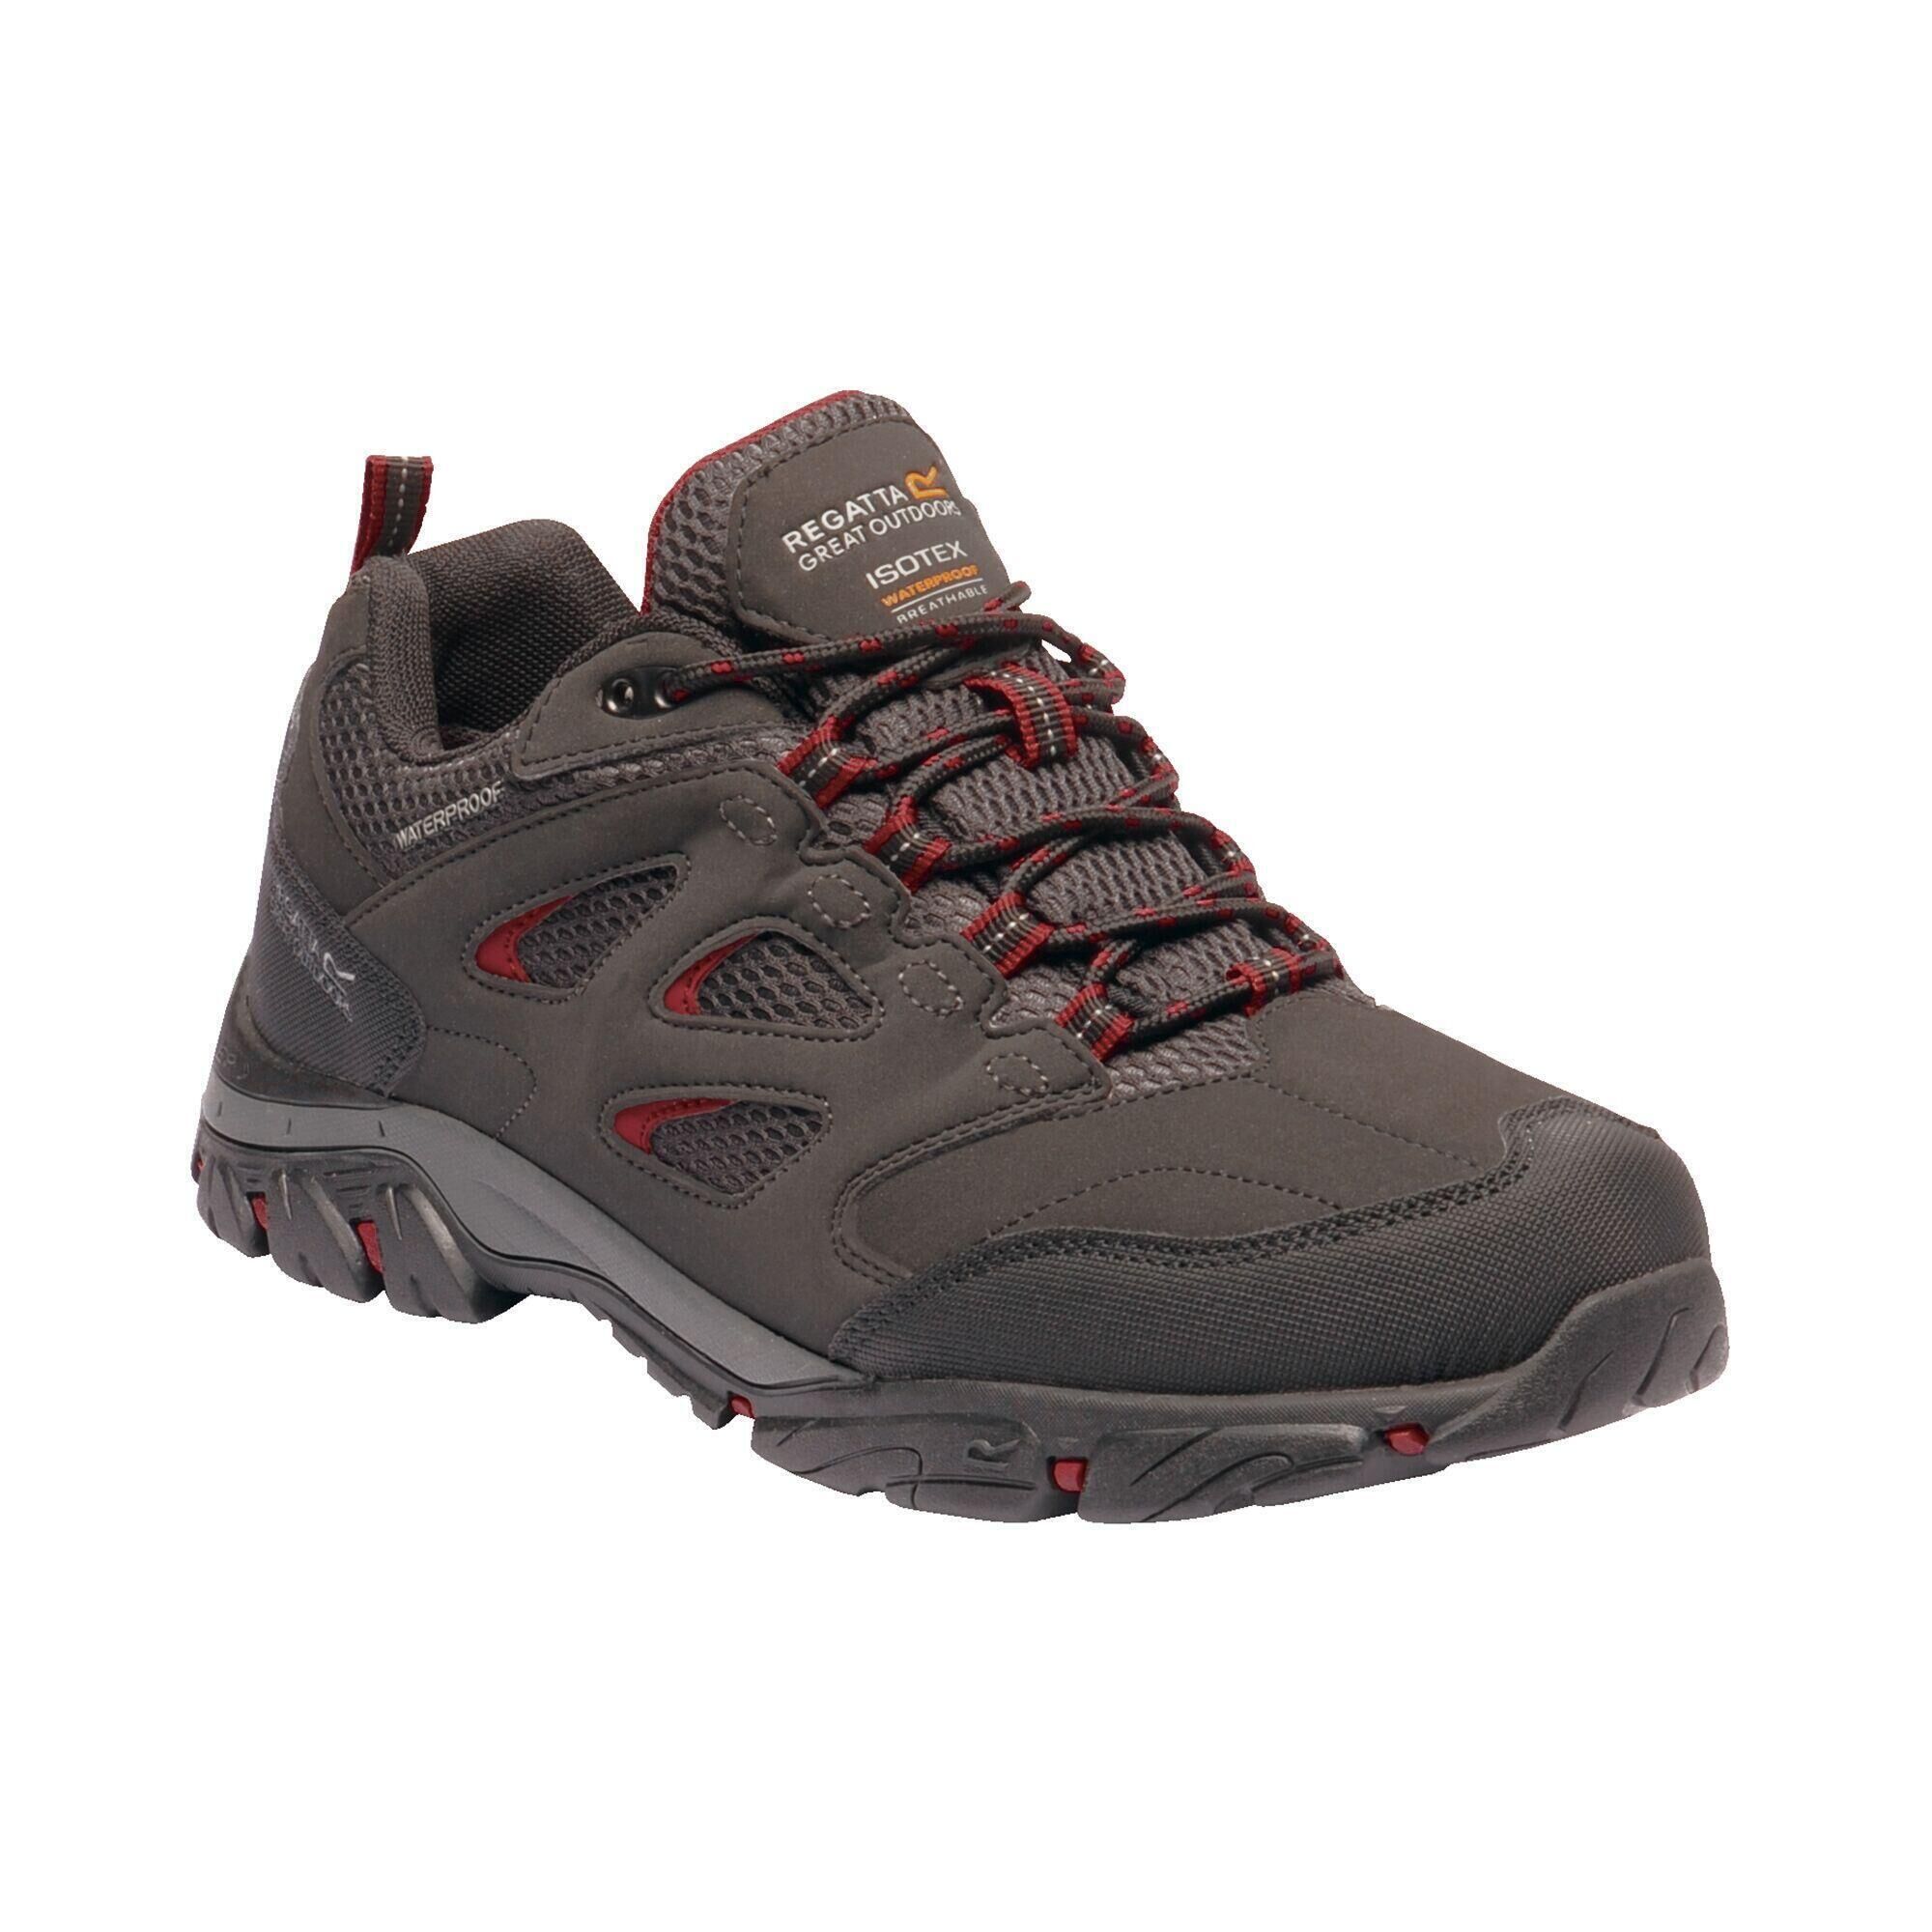 REGATTA Holcombe IEP Low Men's Hiking Boots - Ash Rio Red